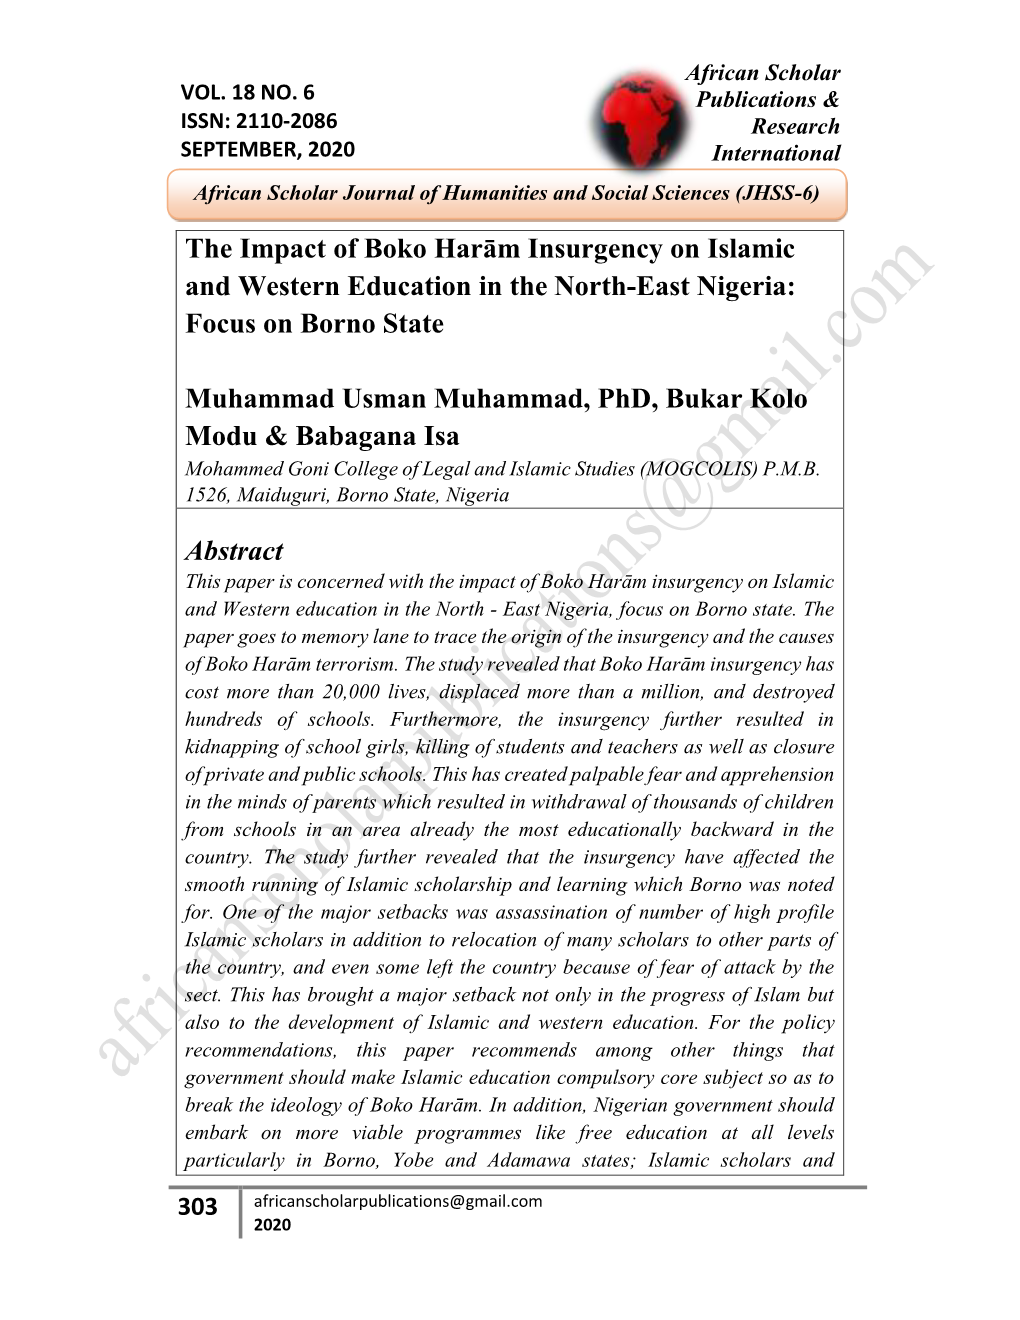 The Impact of Boko Harām Insurgency on Islamic and Western Education in the North-East Nigeria: Focus on Borno State